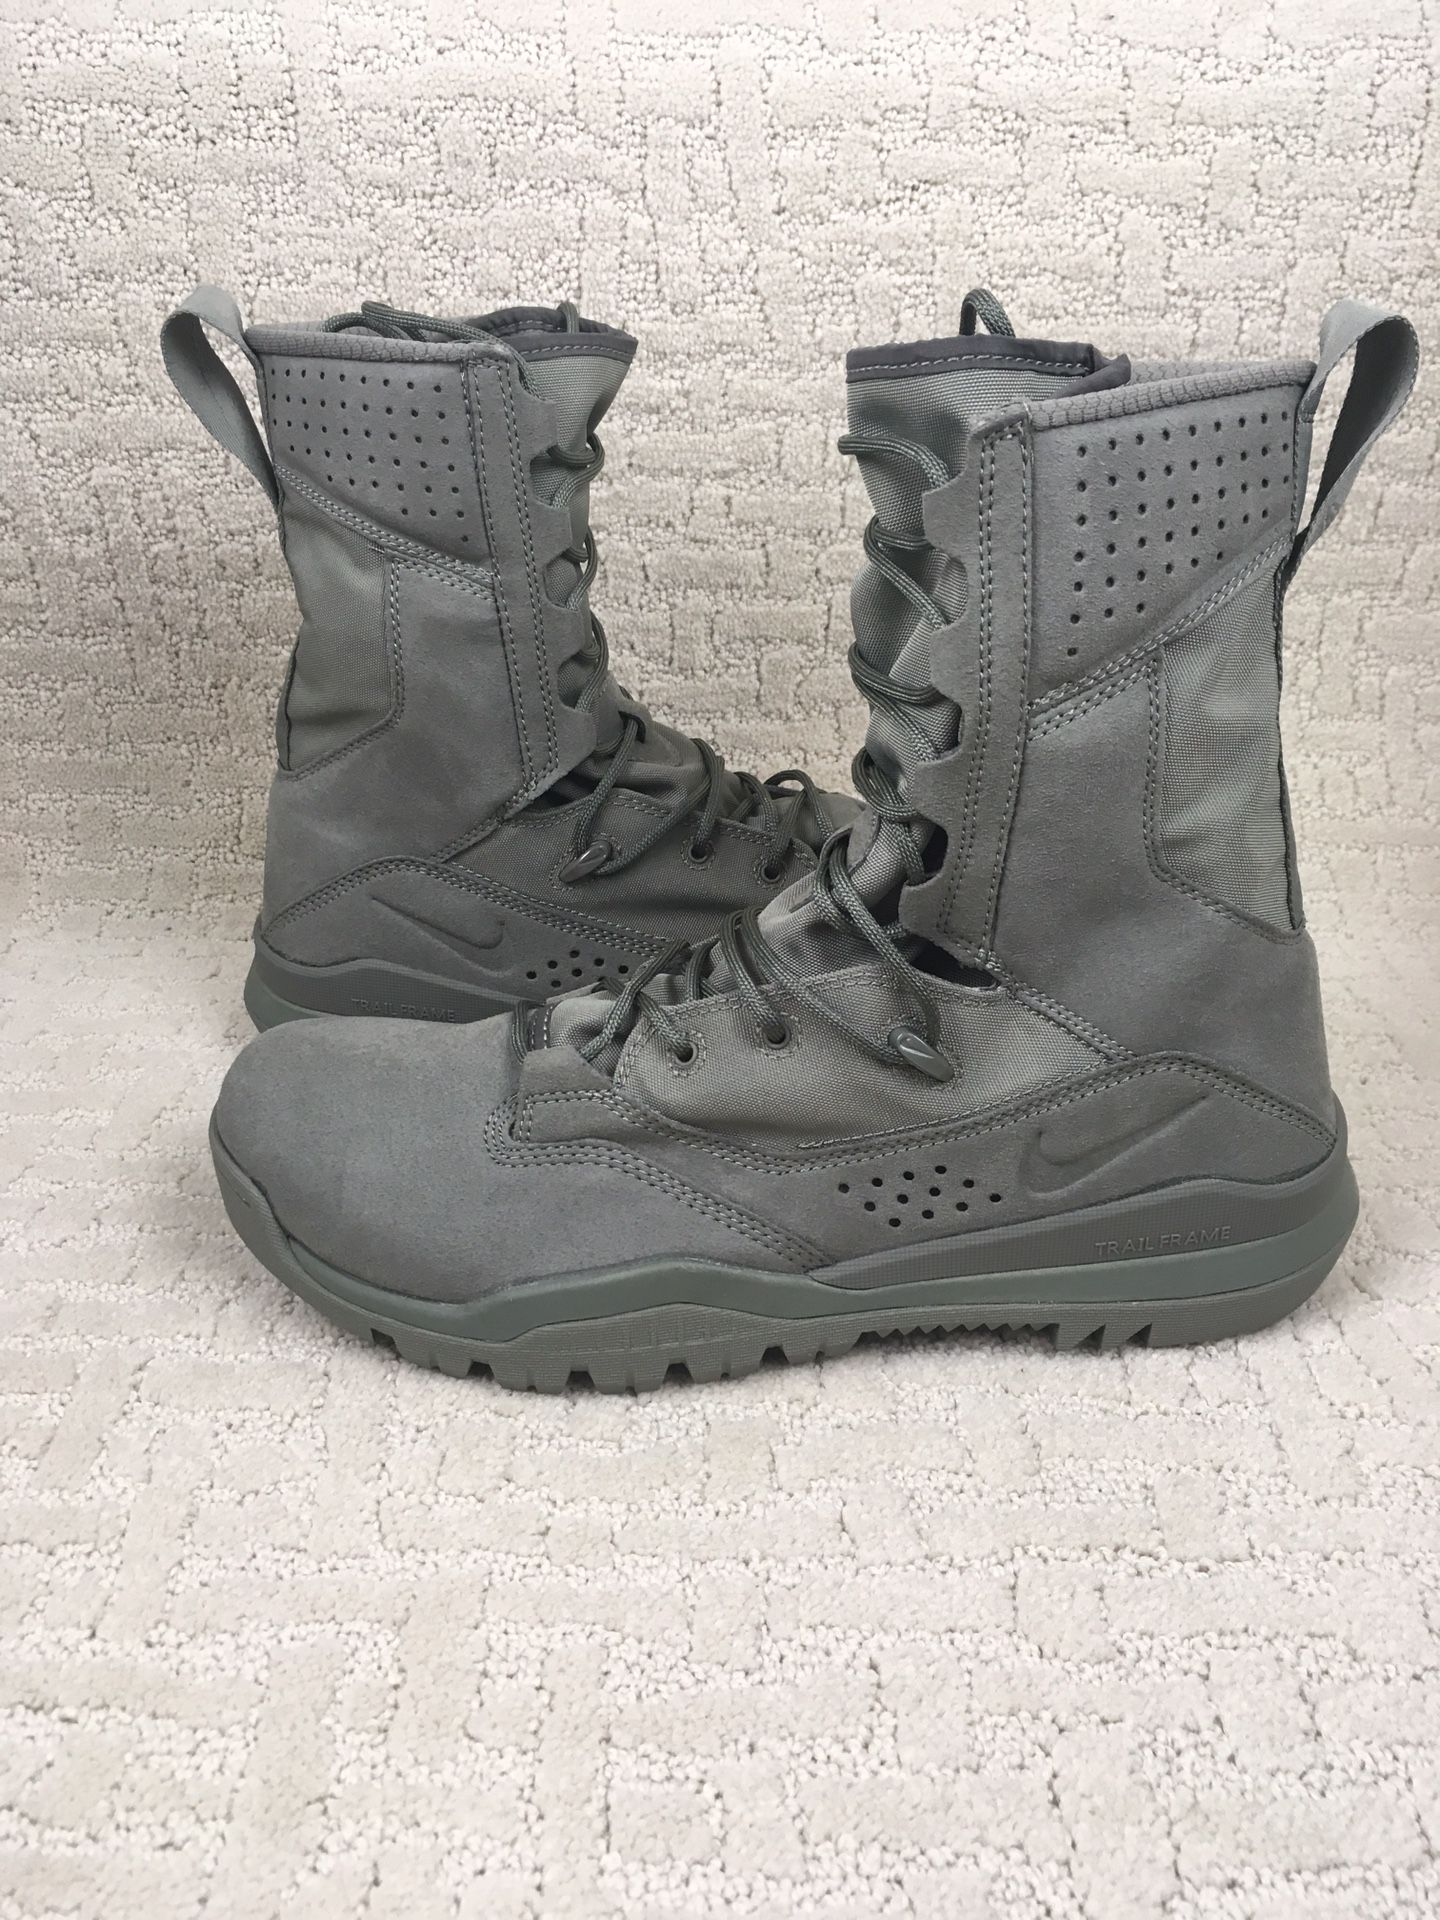 NIKE SFB FIELD 2 - 8" SAGE GREEN MILITARY TACTICAL BOOTS AO7507 201 New without box size 10.5